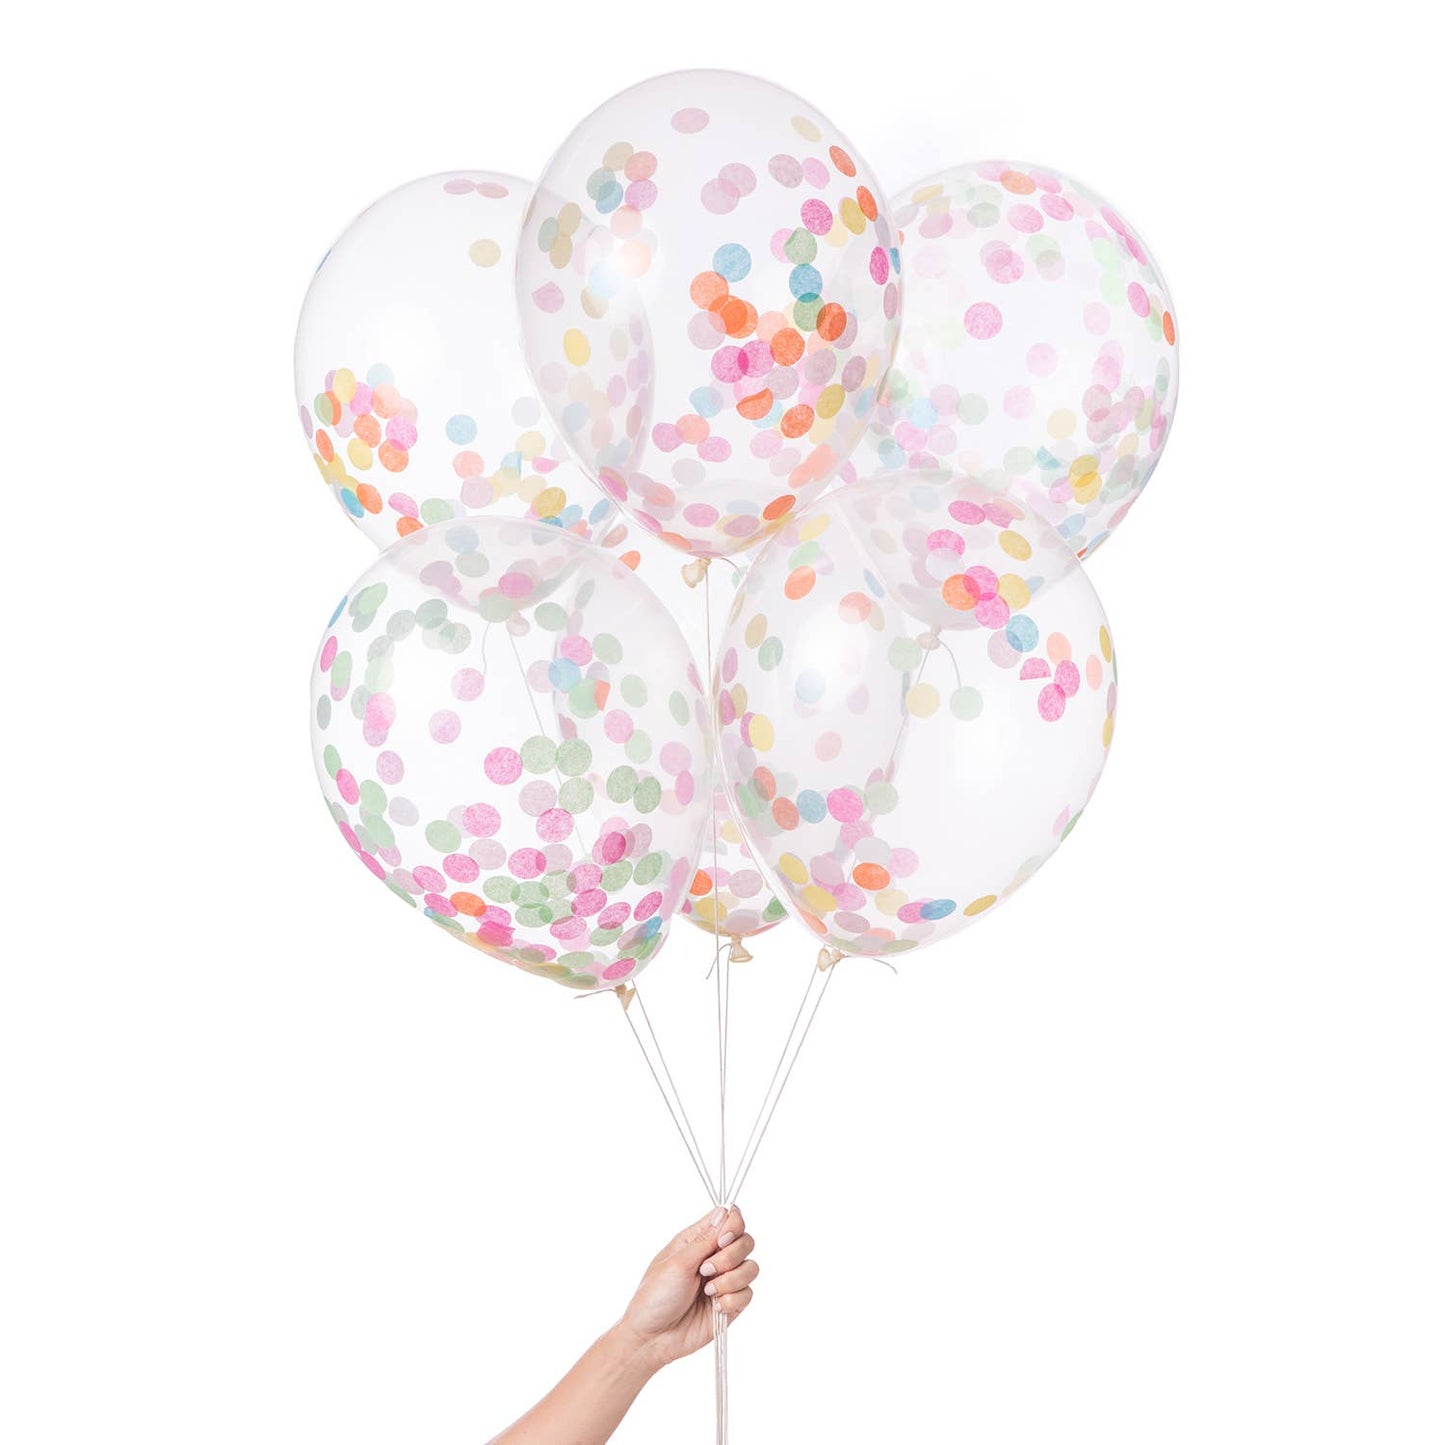 Assorted Pre-Filled Confetti Balloons